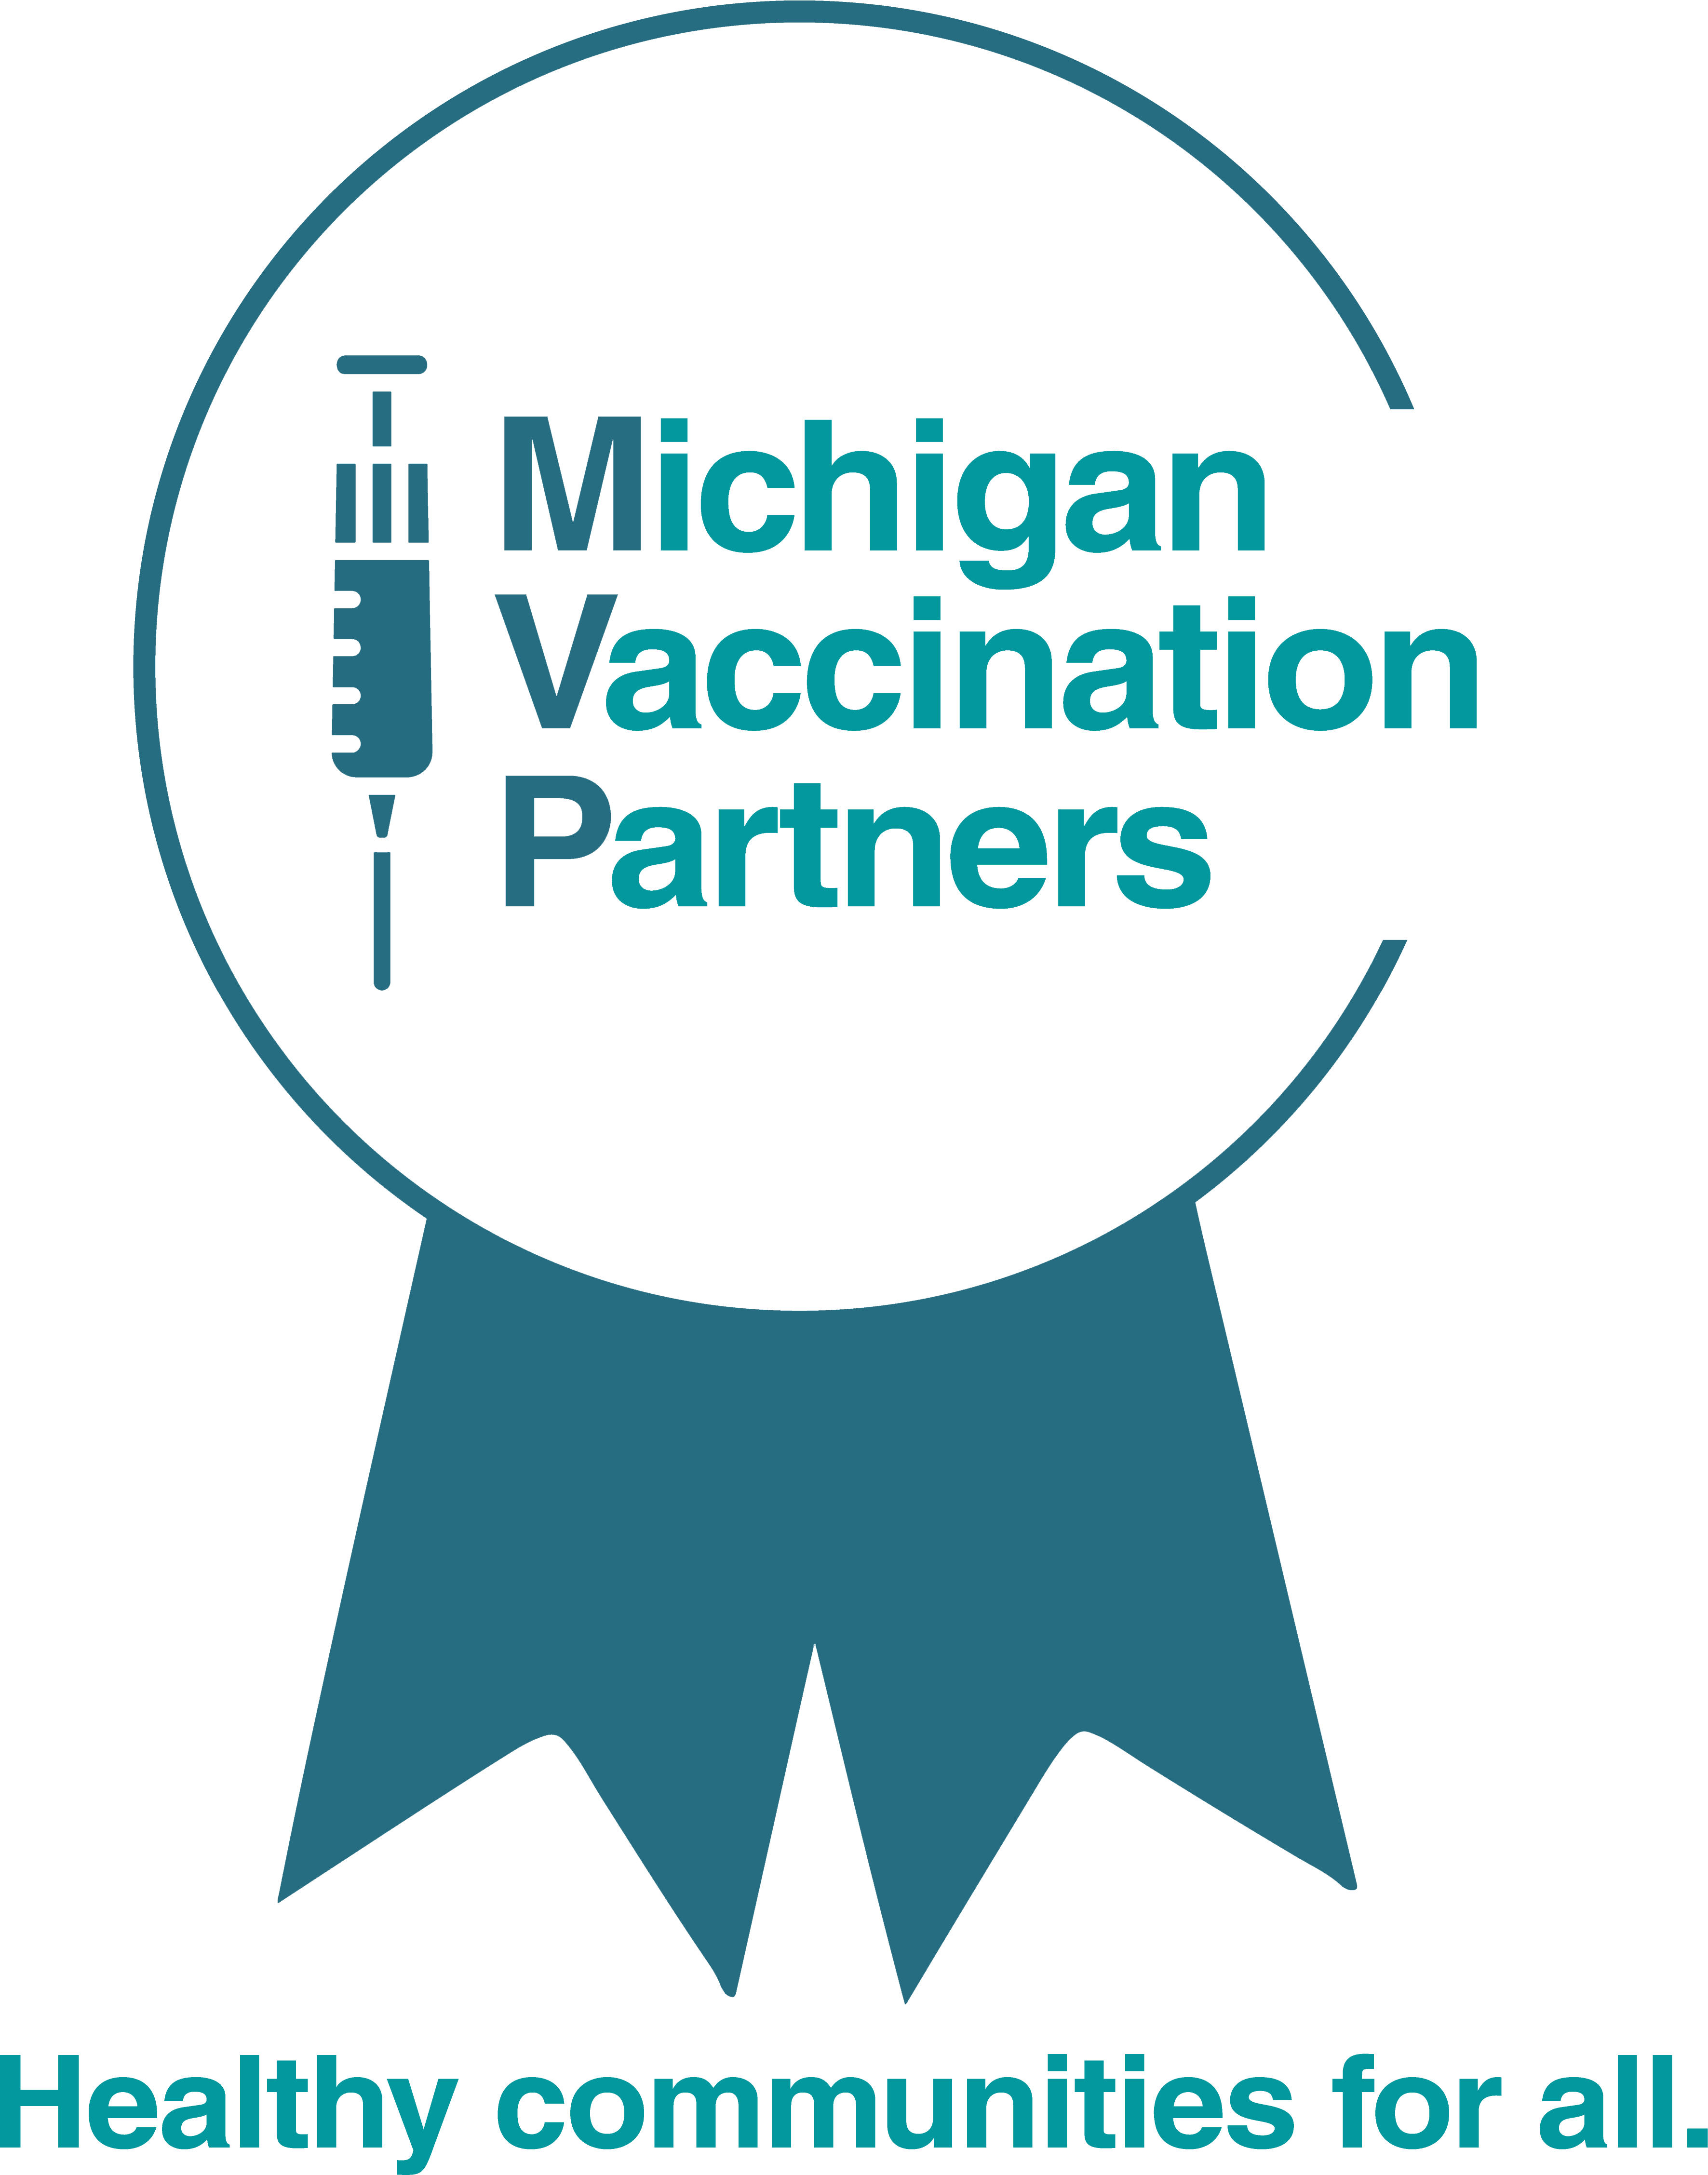 A blue ribbon with the words Michigan Vaccination Partners in the circle with a blue syringe logo next to it. At the bottom is written healthy communities for all.